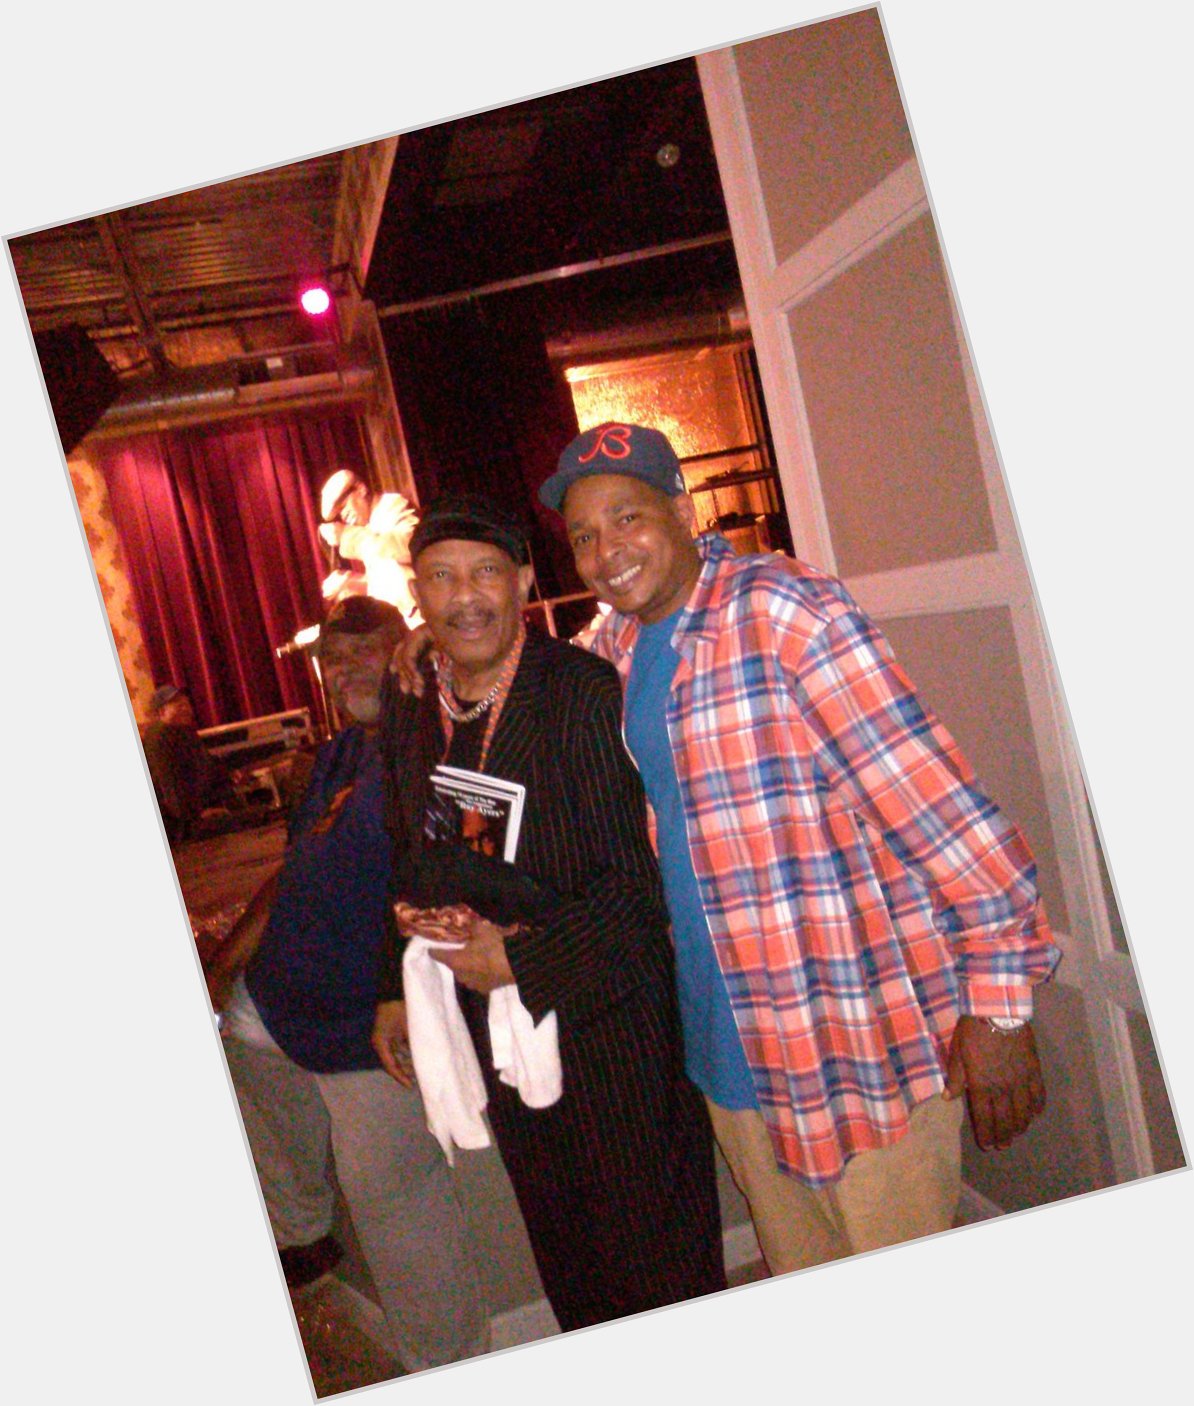 ME & SAY HAPPY BDAY 2 ROY AYERS & 4 THE COLLAB ON Everybody Loves the Sunshine  